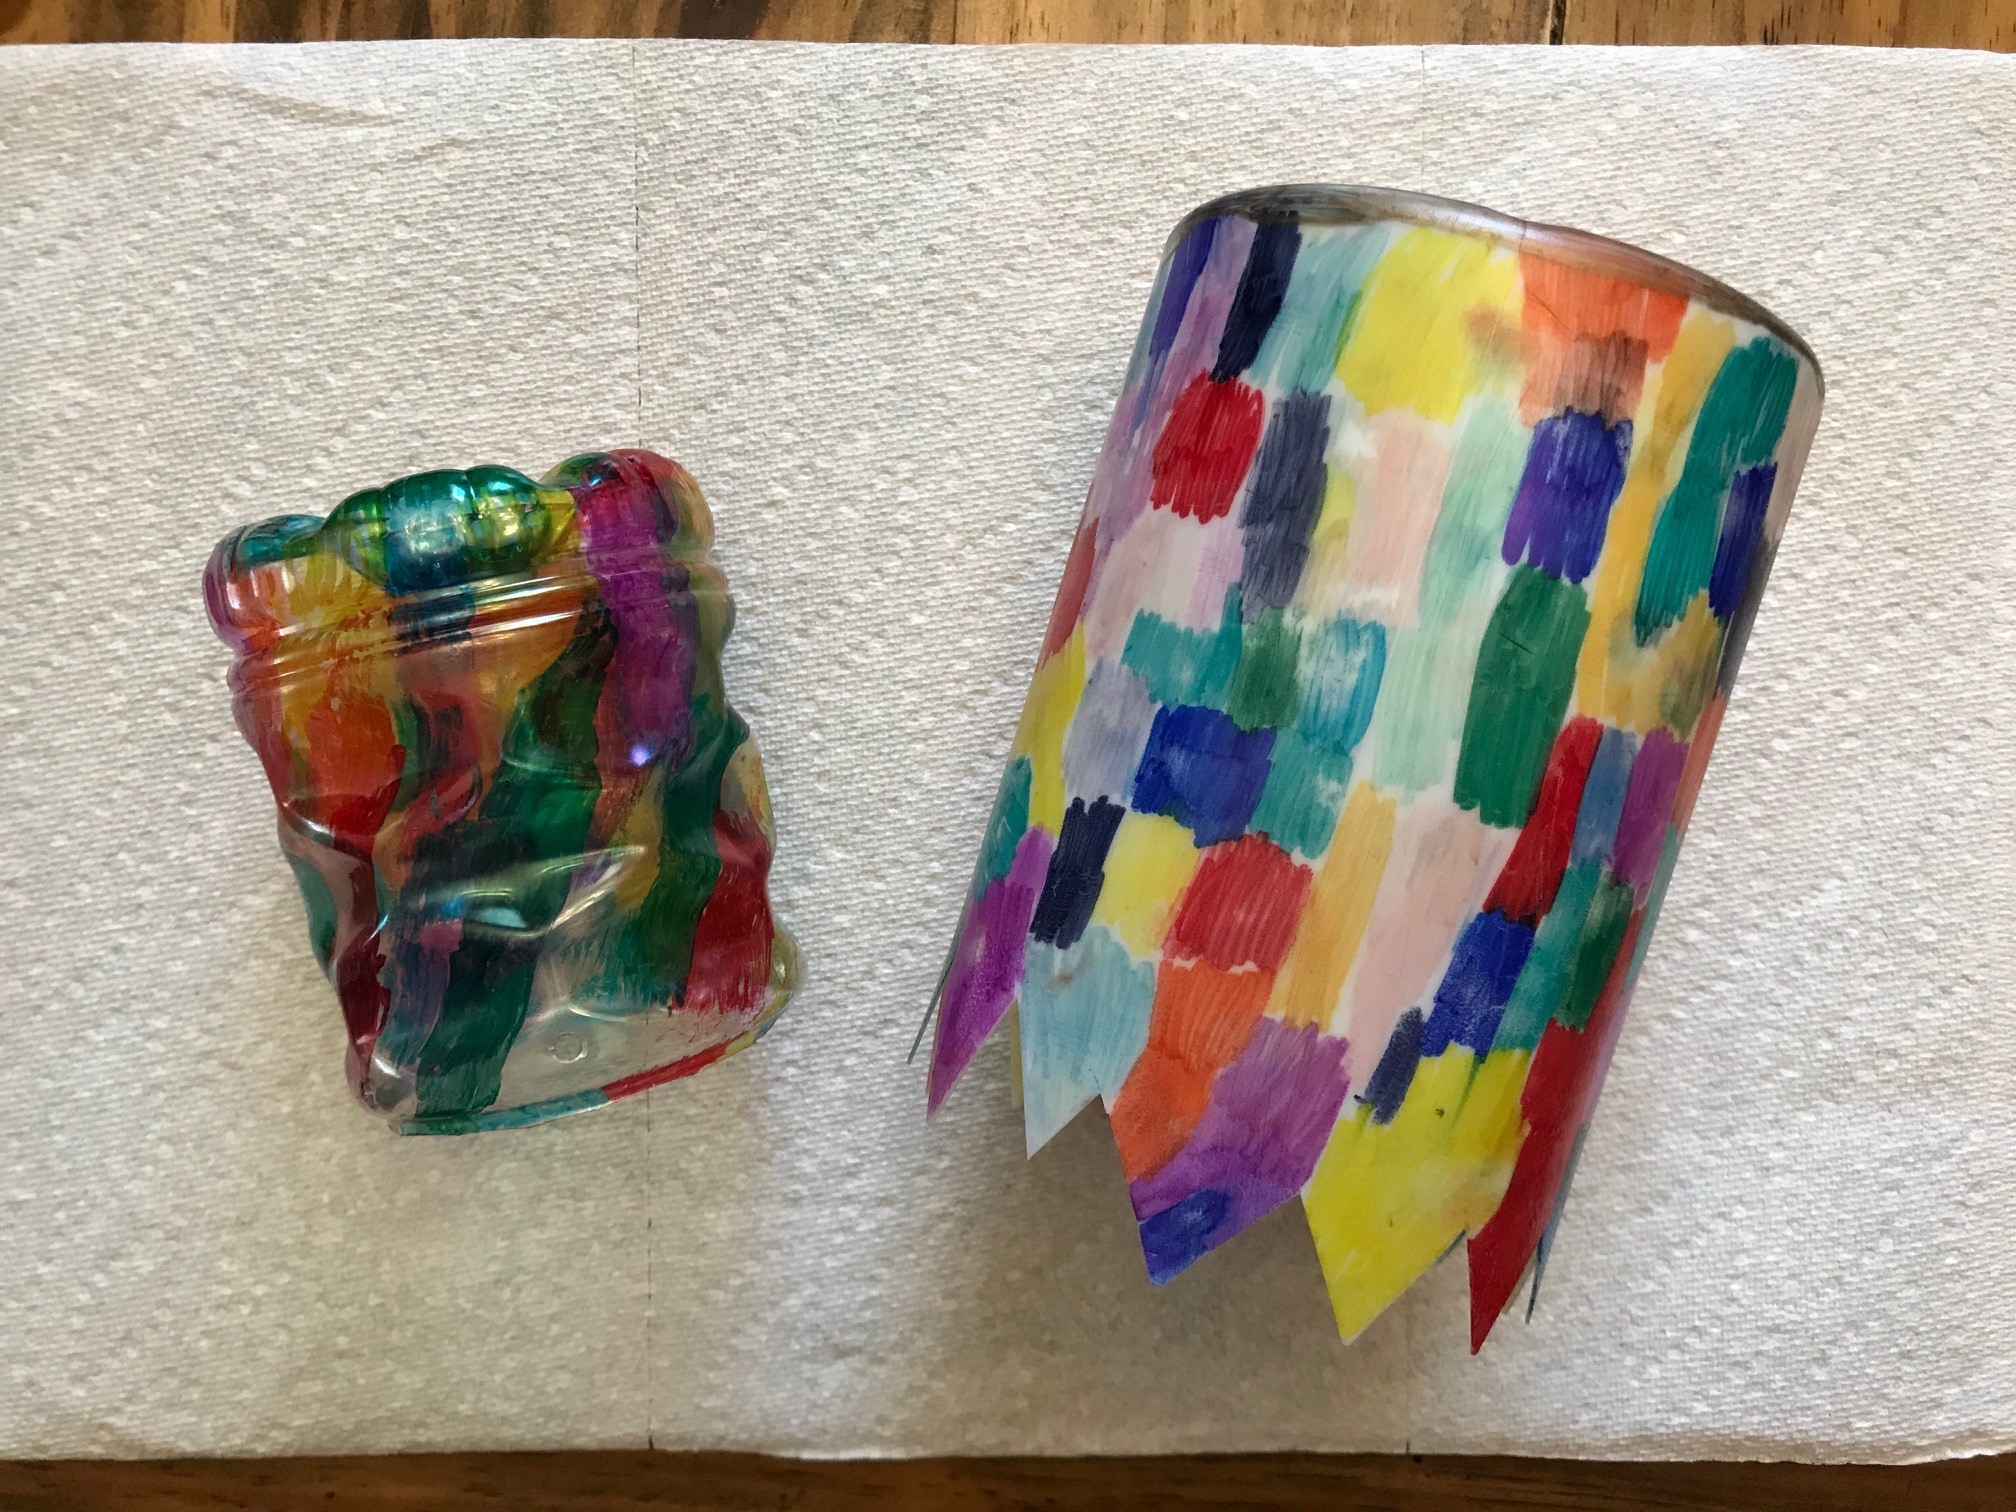 Two modified plastic containers hand painted in multiple colors